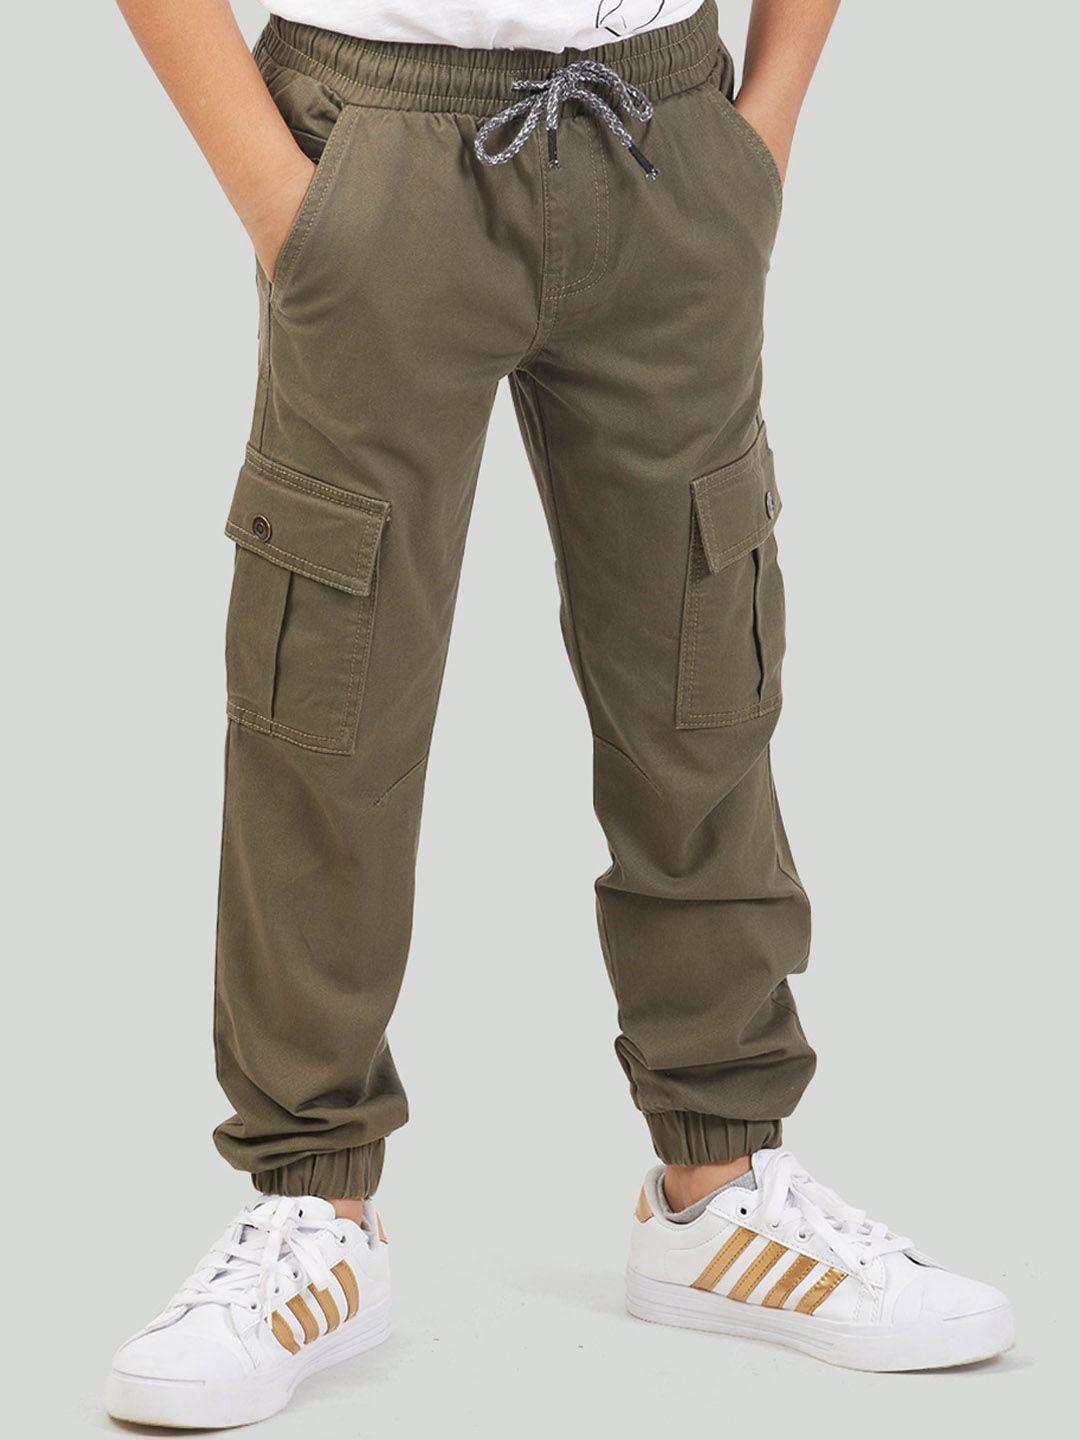 zalio boys olive brown joggers trousers